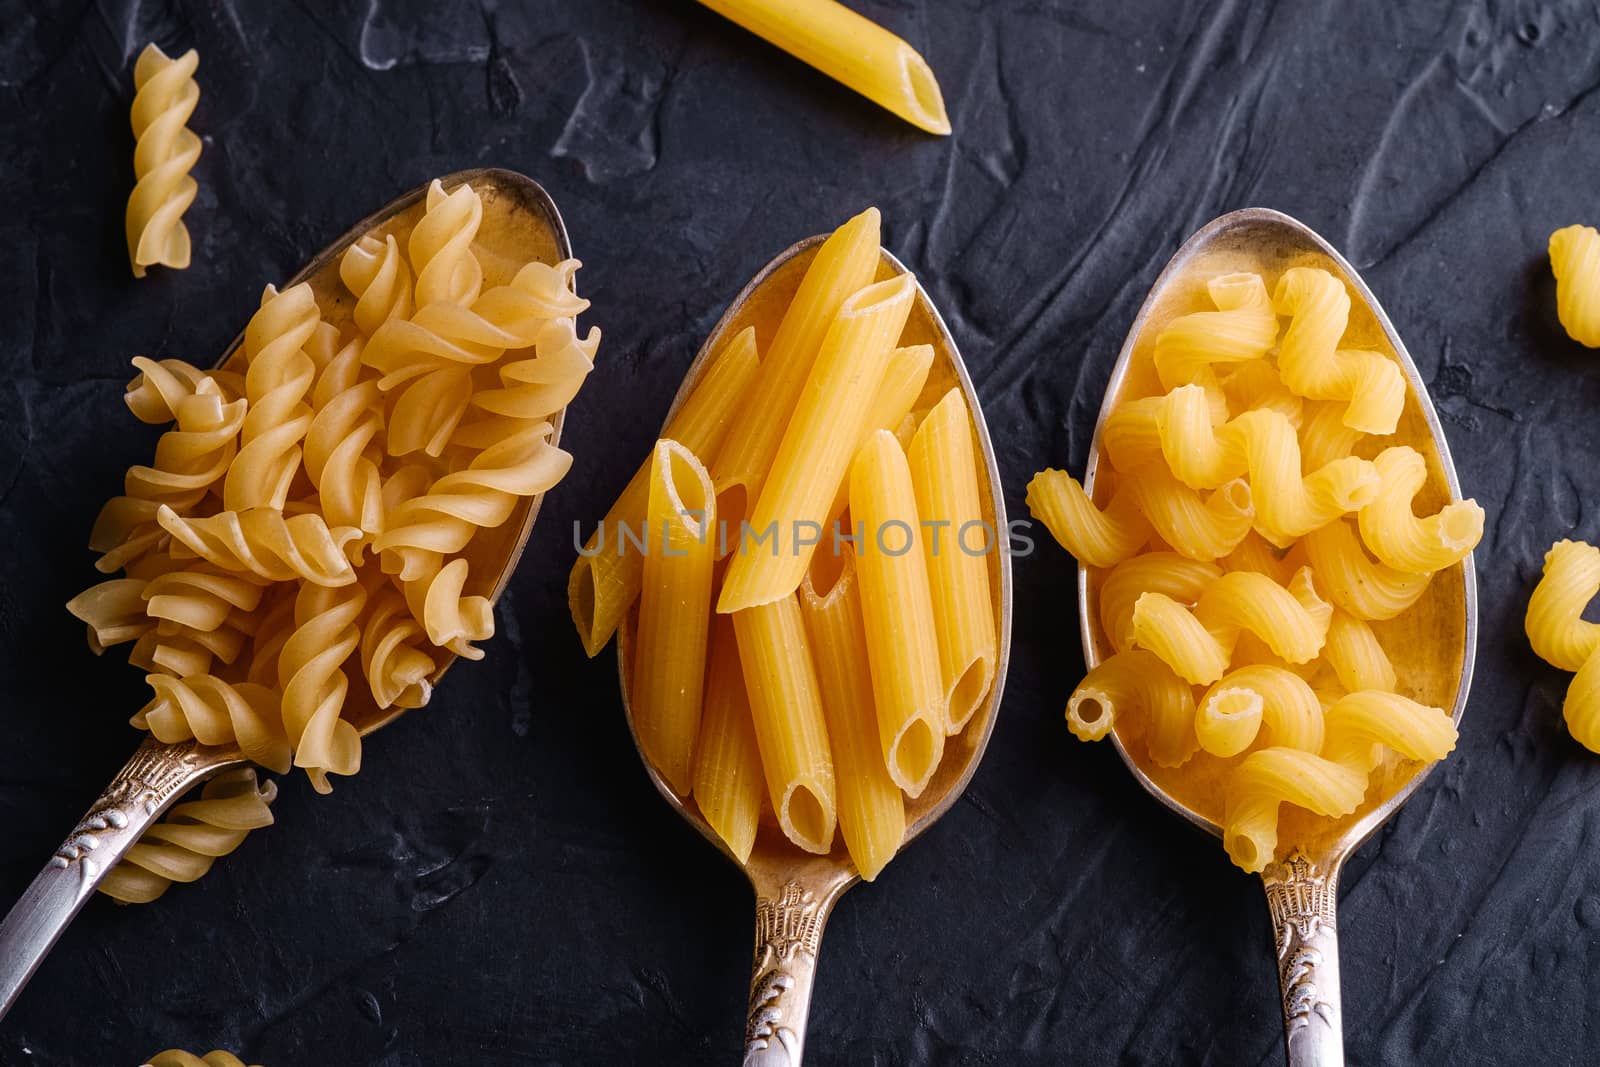 Three cutlery spoons with variety of uncooked golden wheat pasta on dark black textured background, top view macro